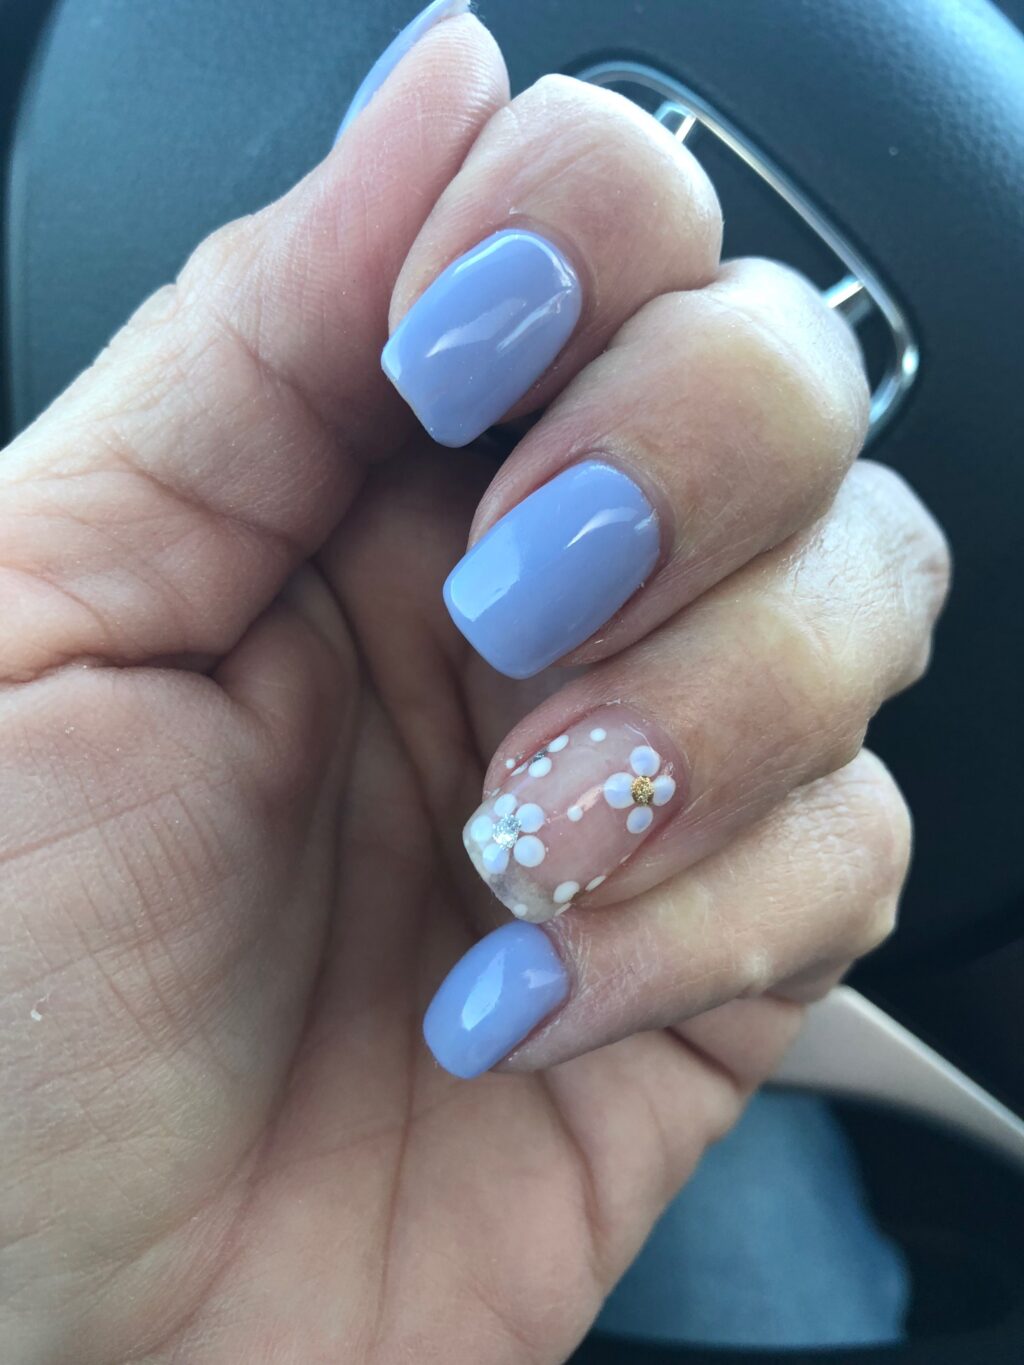 Periwinkle Nails Hottest 70+ Spring Nail Colors - 61